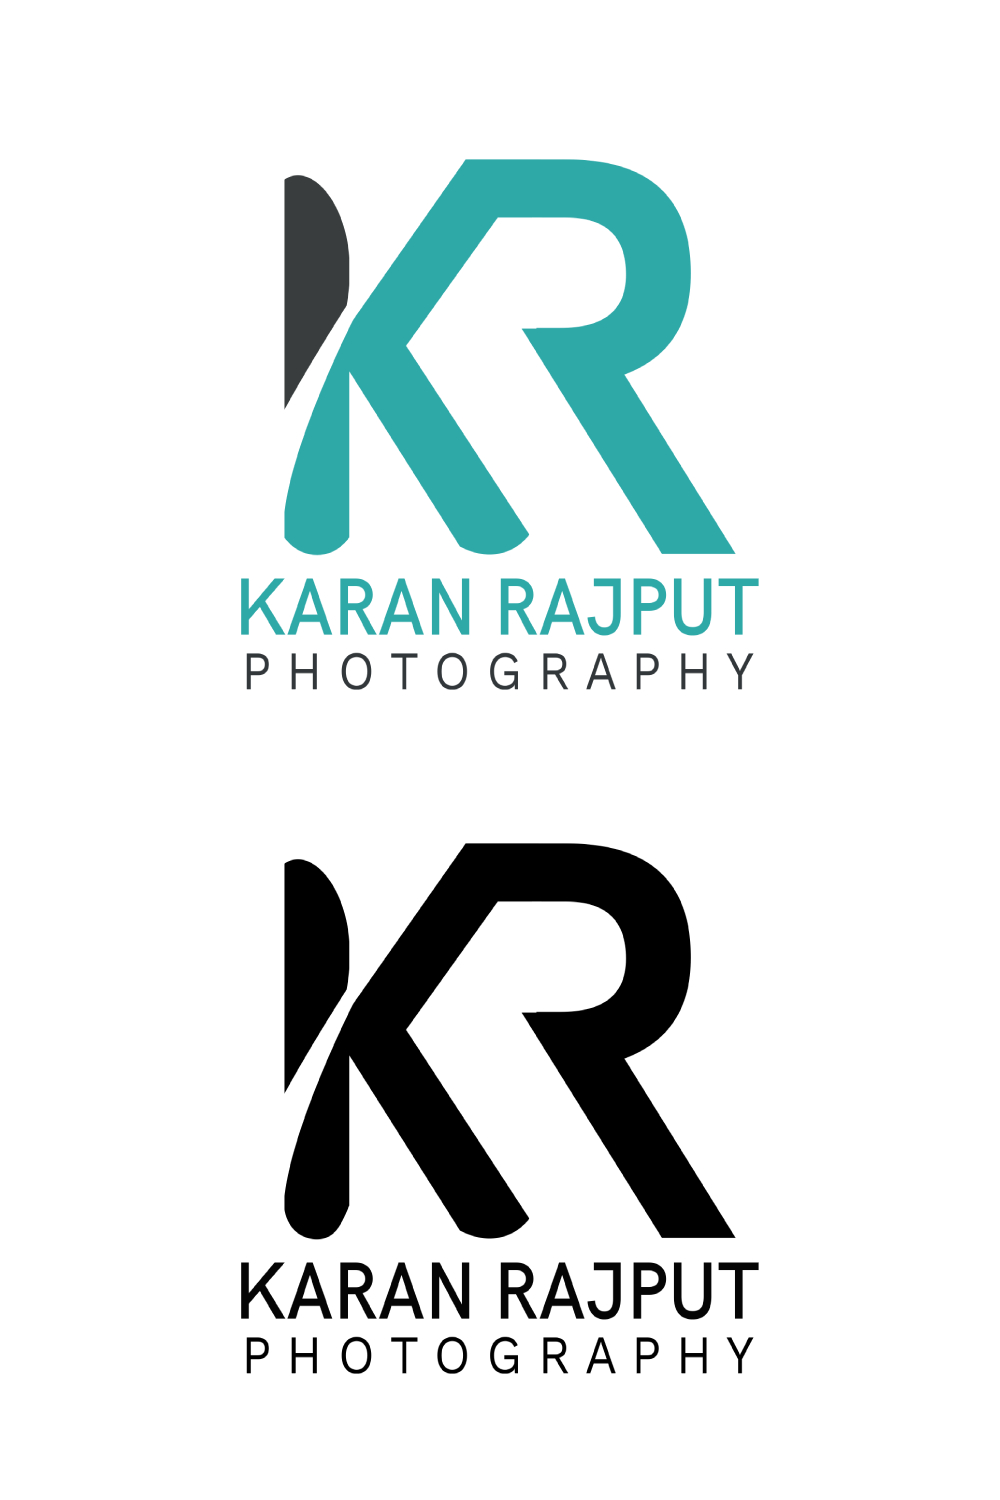 I will professional photography logo design pinterest preview image.